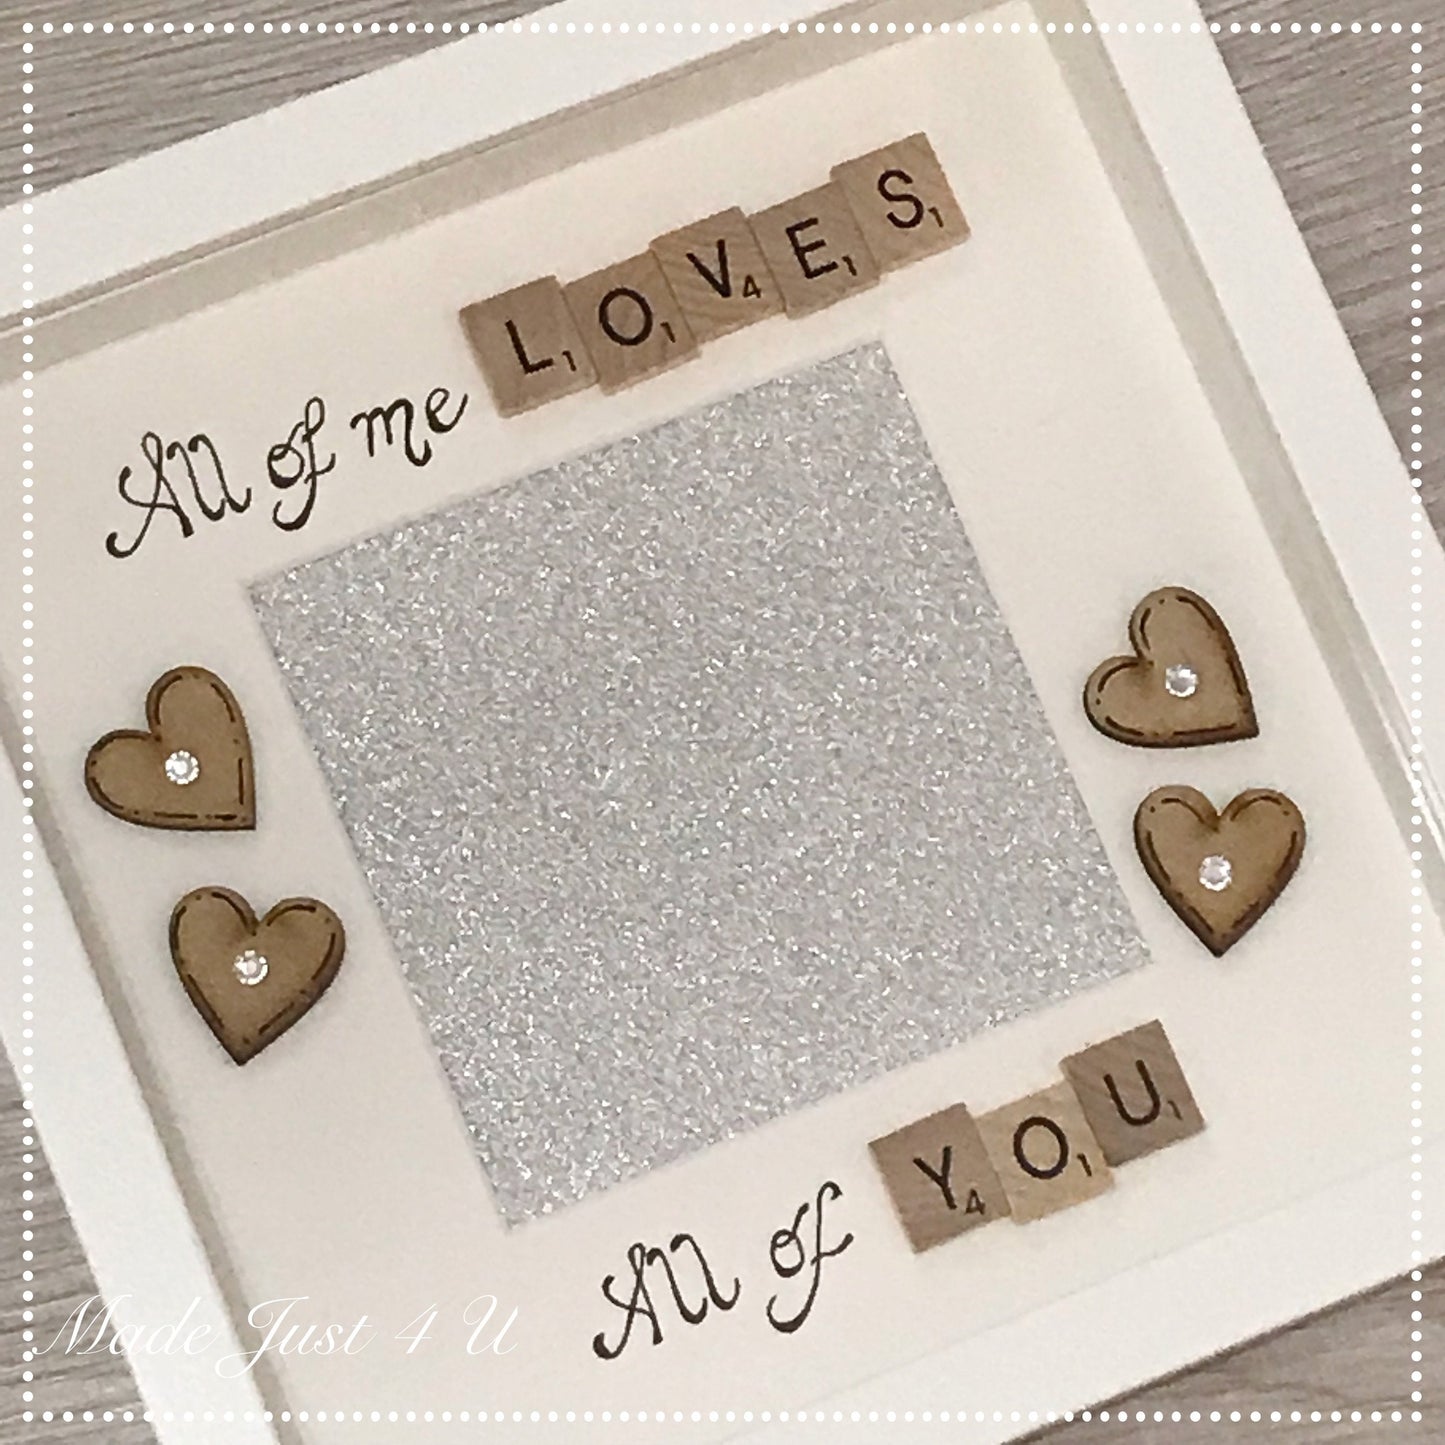 All of Me Loves All of you Picture Frame